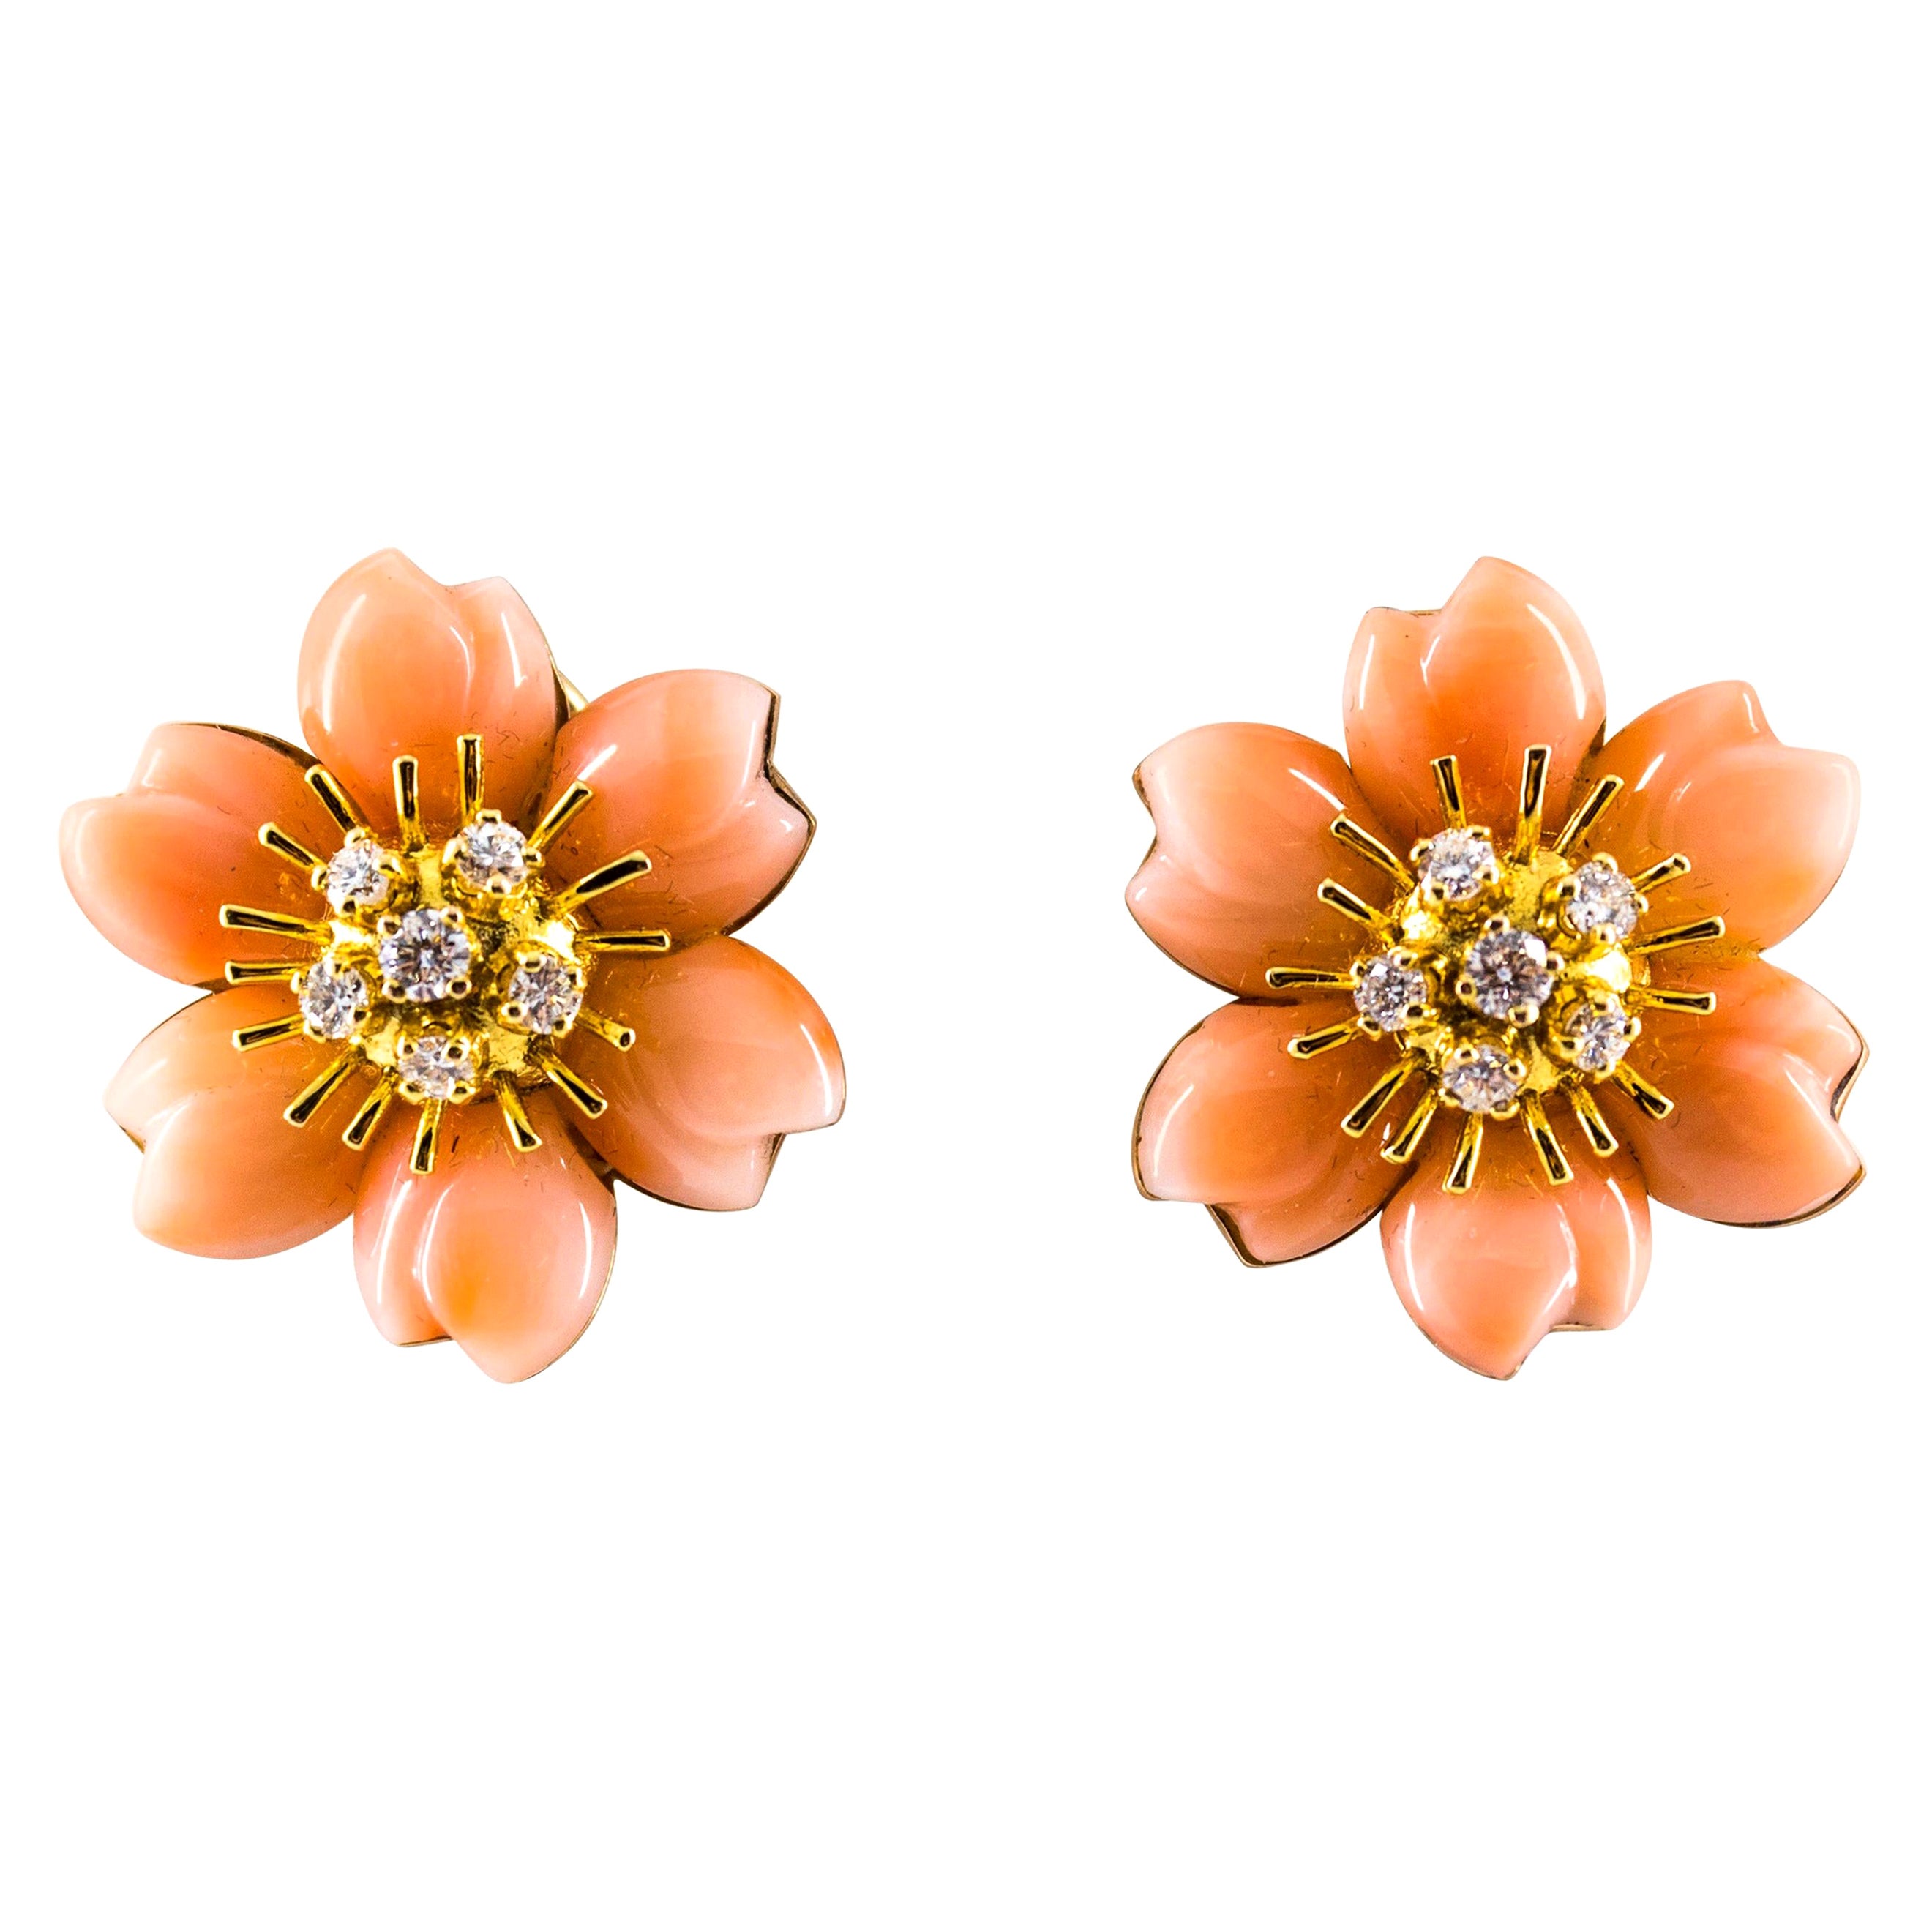 Art Nouveau Style White Diamond Pink Coral Yellow Gold Flowers Clip-On Earrings